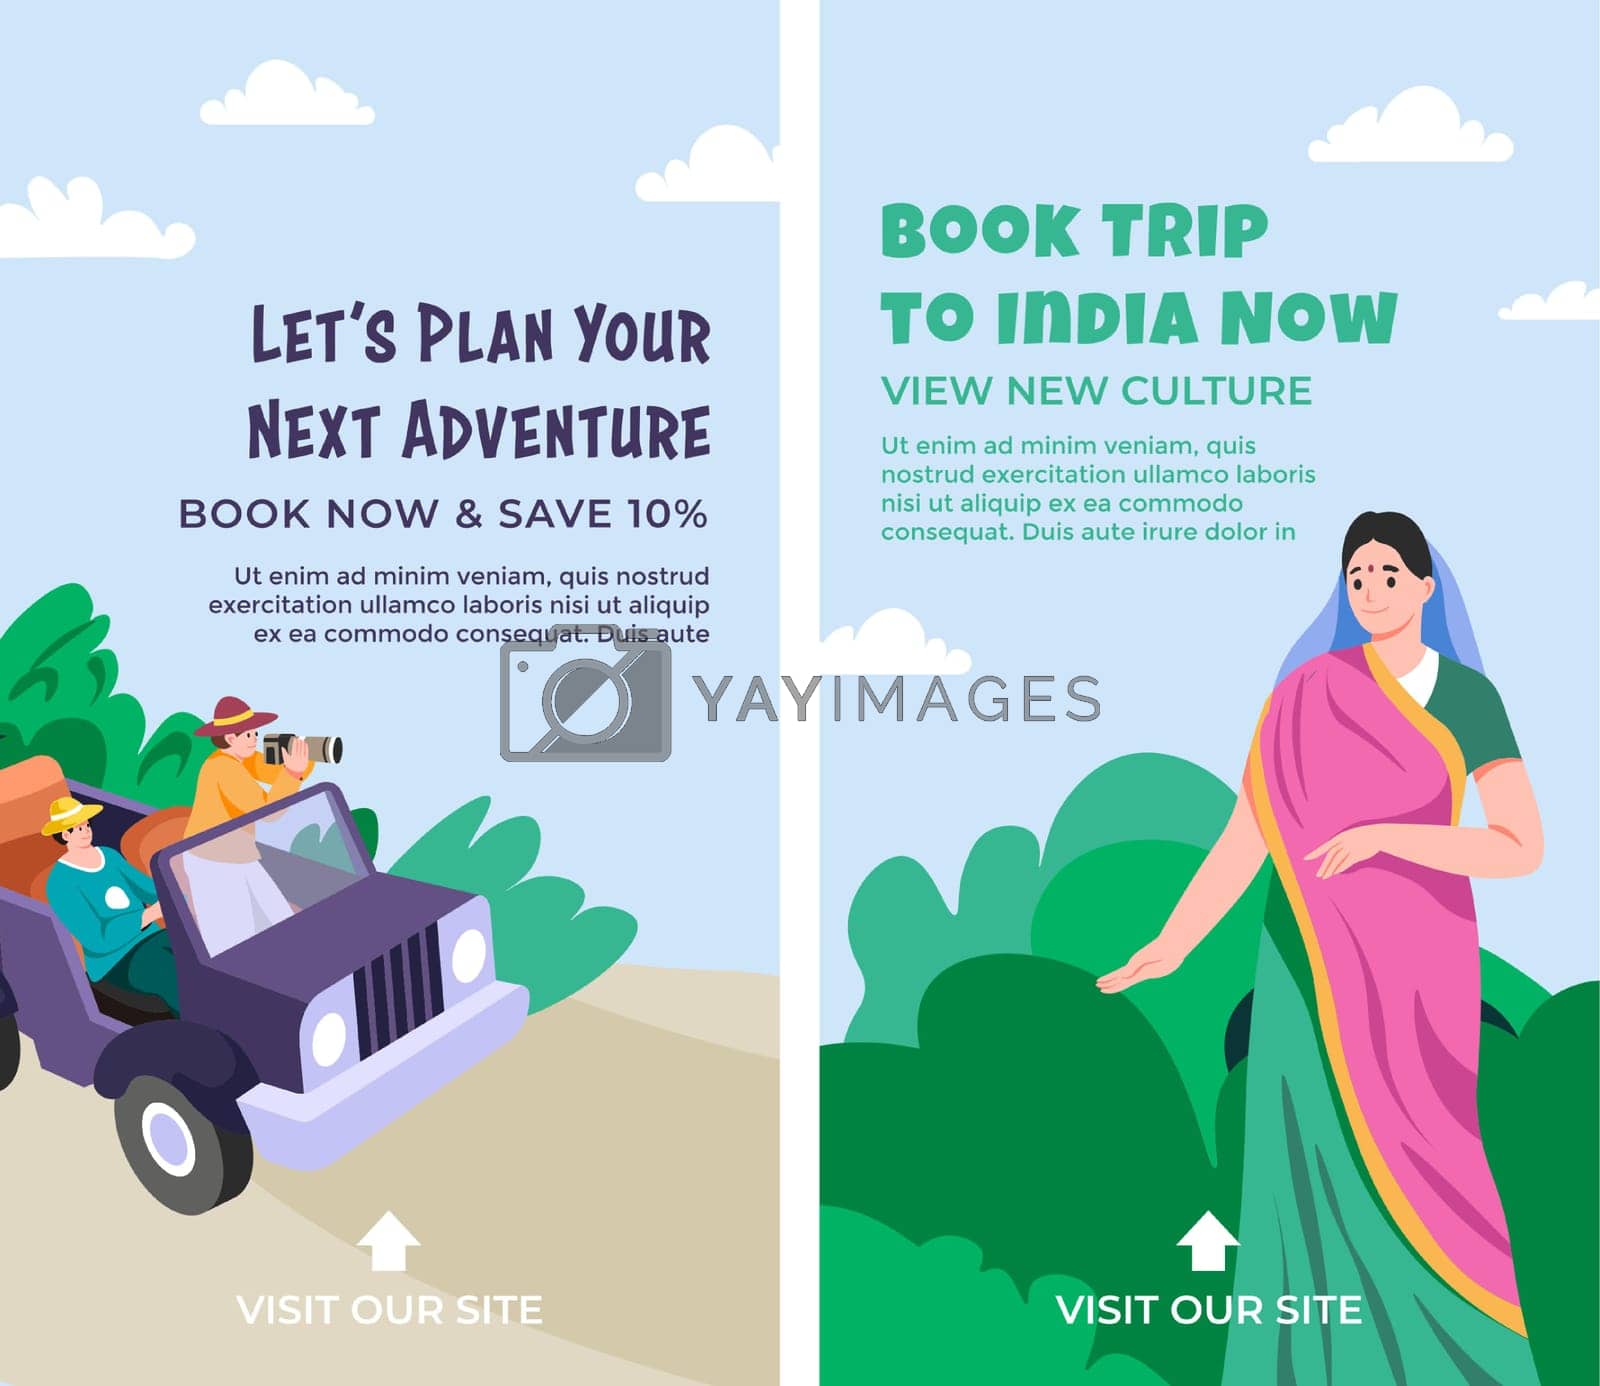 Royalty free image of Lets plan your next adventure, book trip to India by Sonulkaster